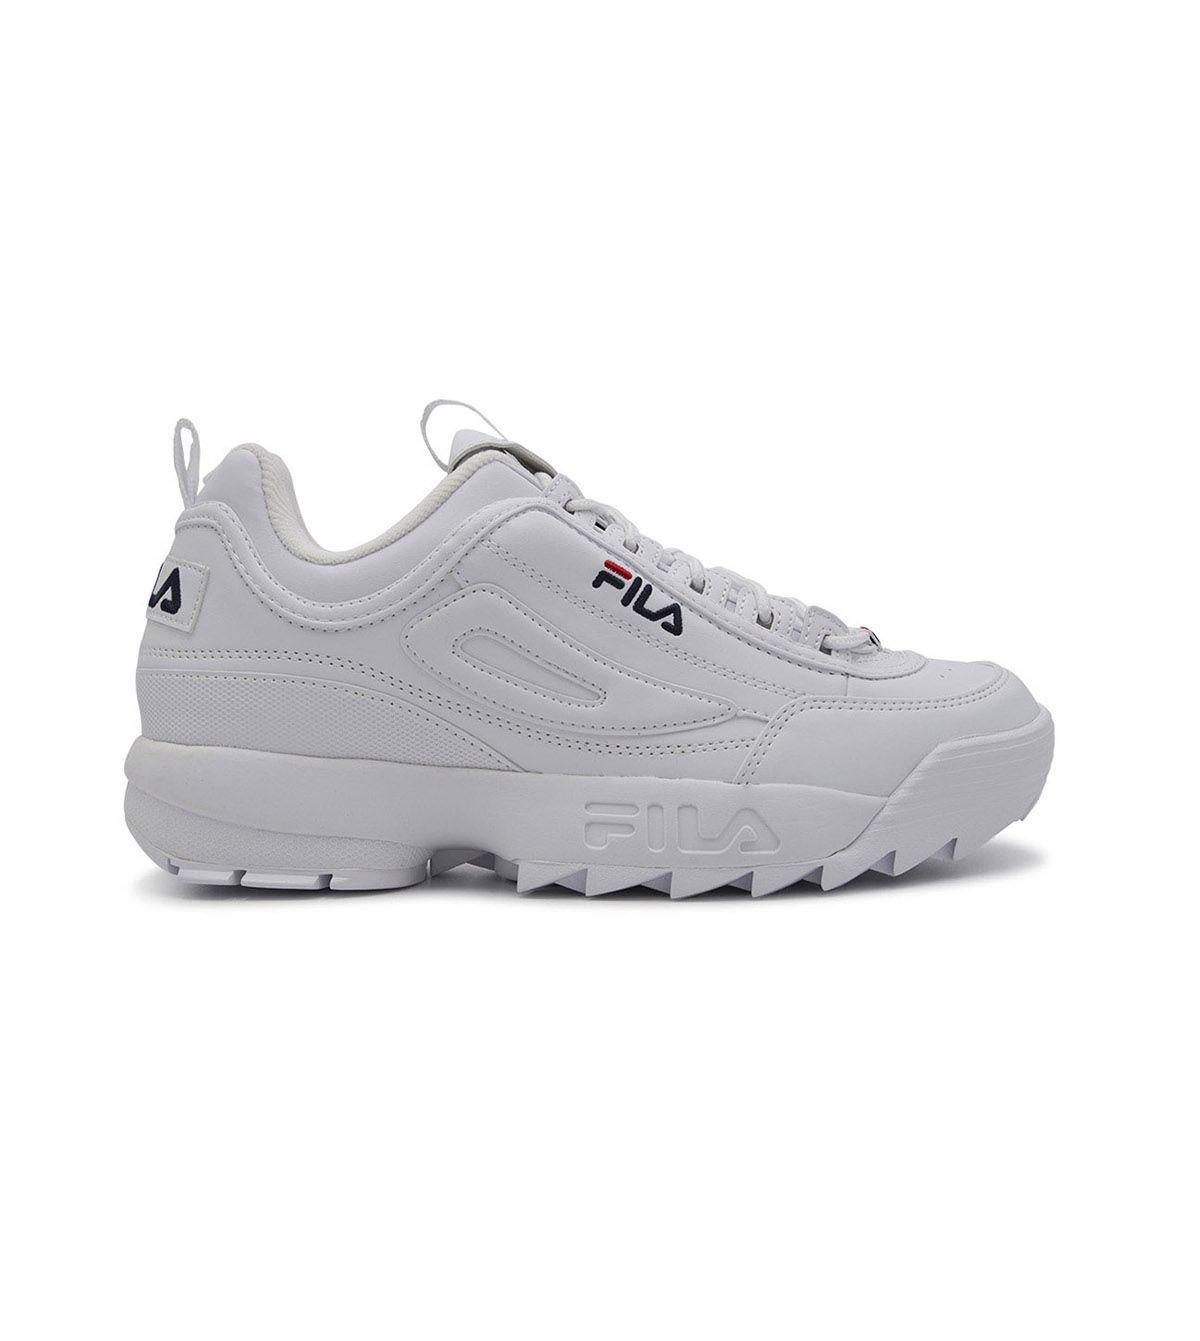 Fila White Leather Sneakers for Men - Lyst